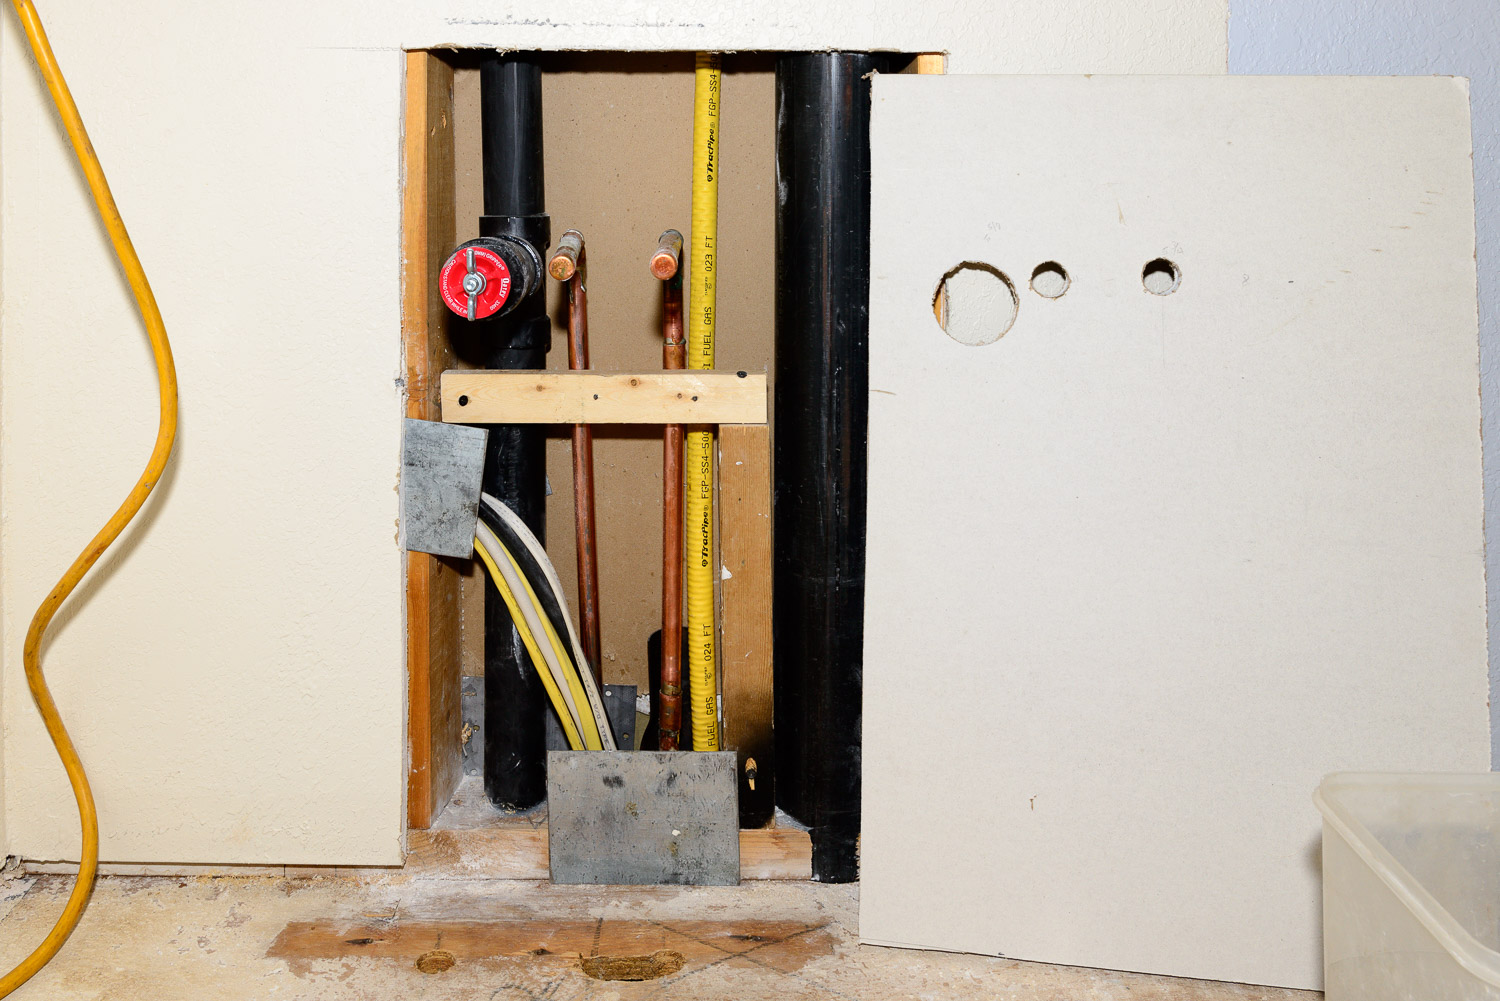 Places where utilities go through a stud should have a steel plate inserted. The reasoning is that studs are hammered and drilled into on a regular basis to hang things on the walls and to fasten baseboard trim with a nail gun at the floor